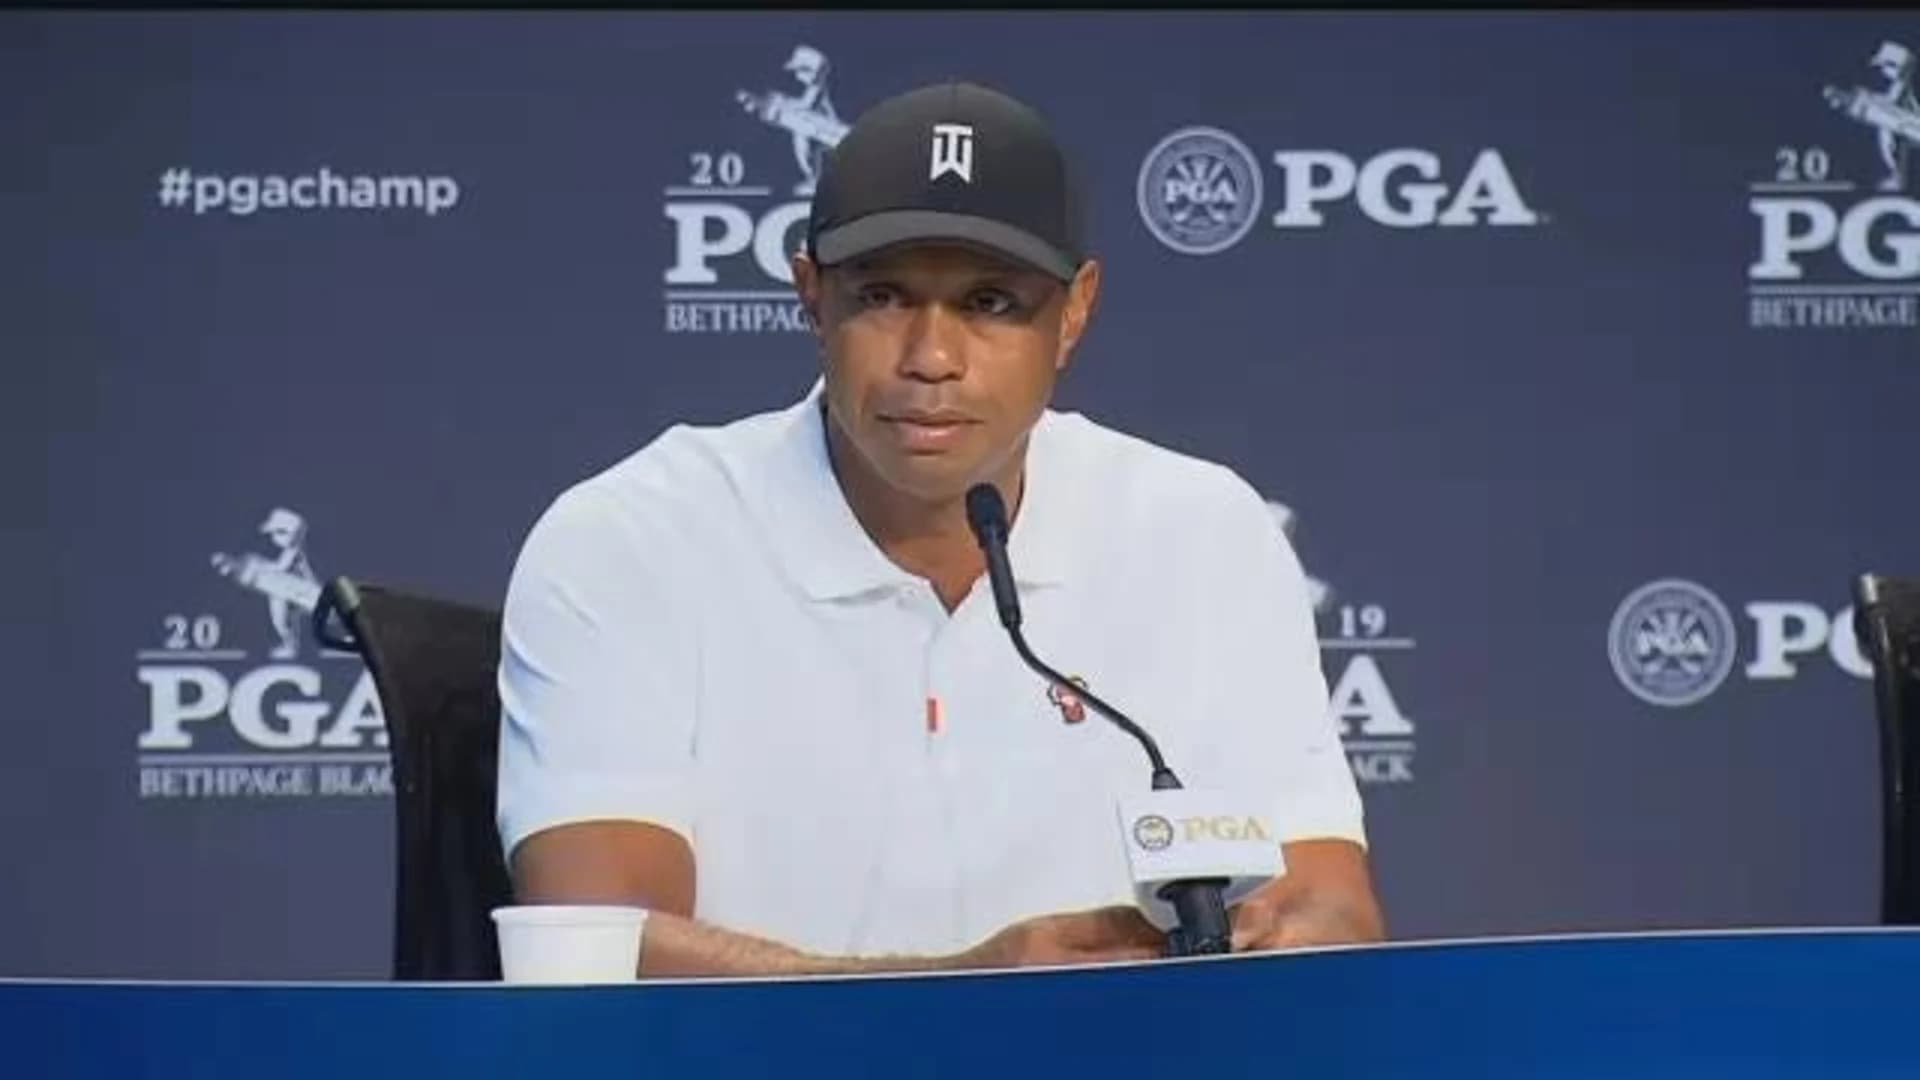 Extended news conference with Tiger Woods during PGA Championship week